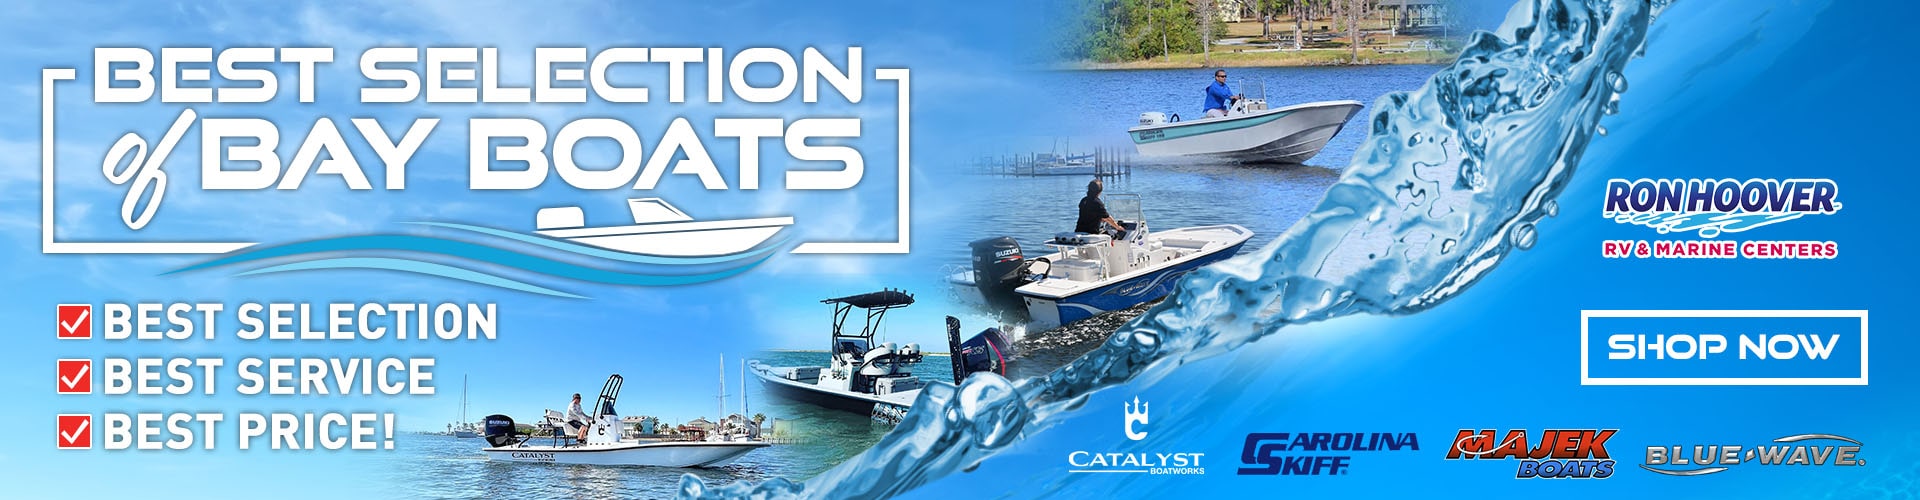 Best Selection of Bay Boats